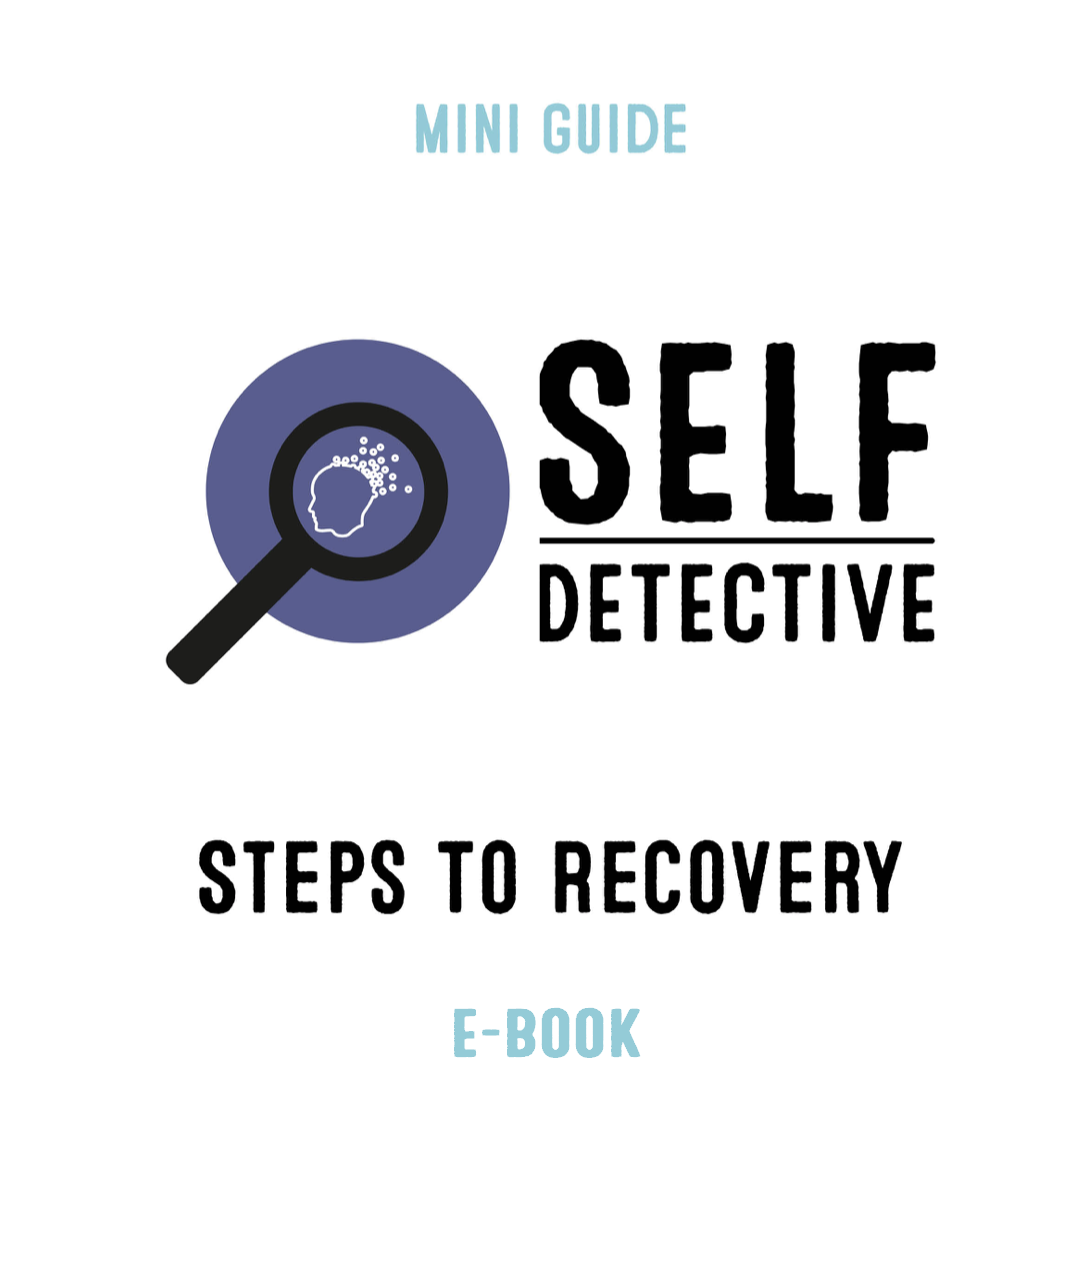 Steps To Recovery (E-book version)